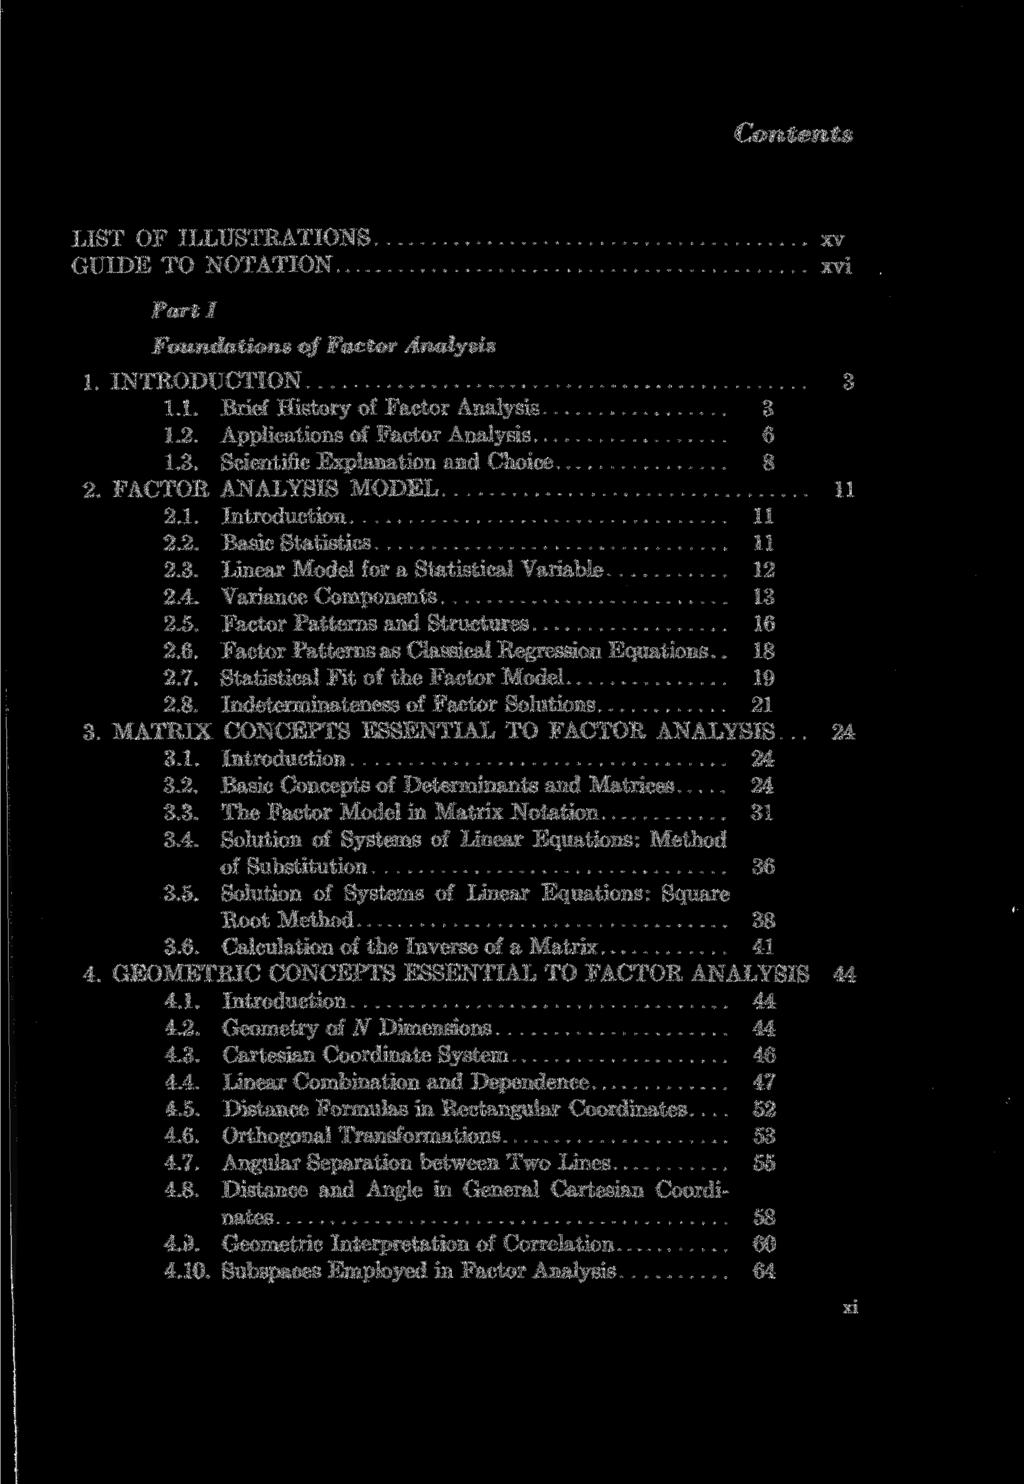 Contents LIST OF ILLUSTRATIONS GUIDE TO NOTATION xv xvi Parti Foundations of Factor Analysis 1. INTRODUCTION 3 1.1. Brief History of Factor Analysis 3 1.2. Applications of Factor Analysis 6 1.3. Scientific Explanation and Choice 8 2.